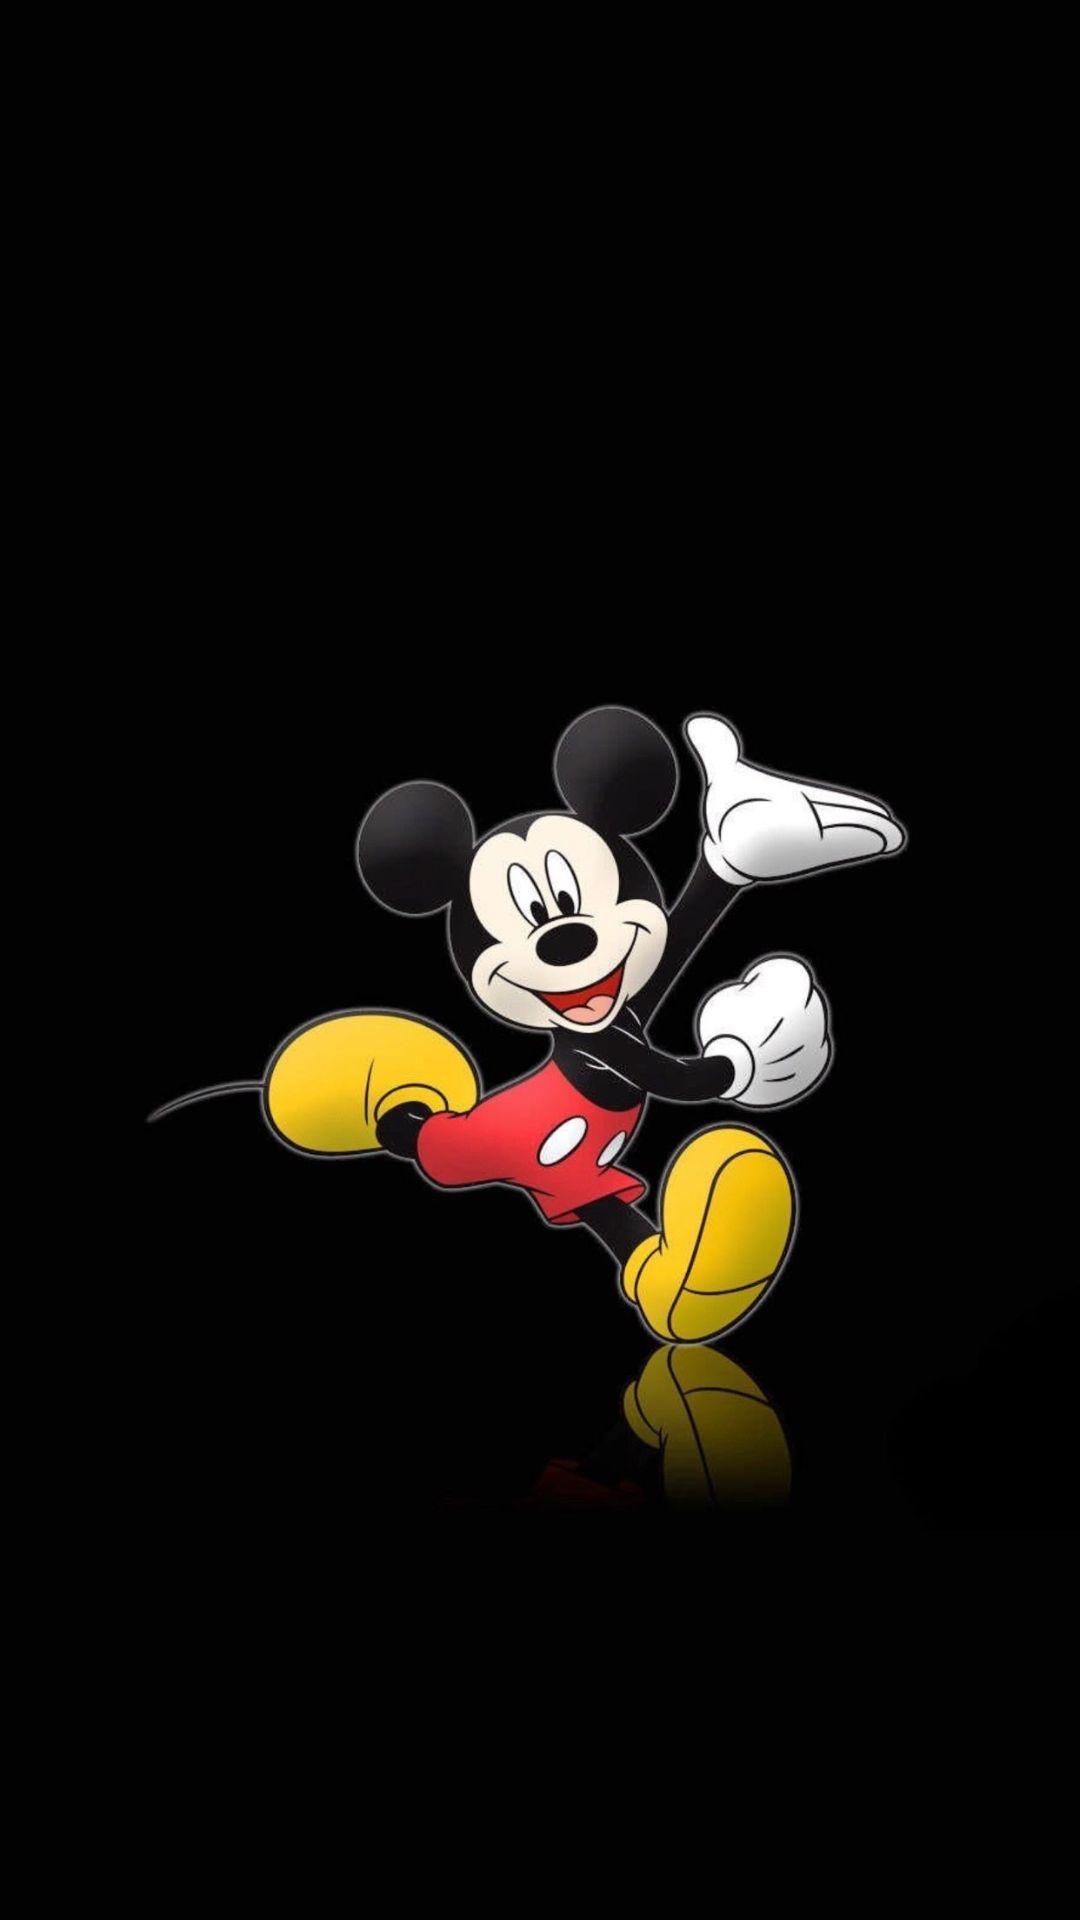 Mickey Mouse wallpapers for desktop, iPhone, PC, and mobile, Versatile options, 1080x1920 Full HD Phone